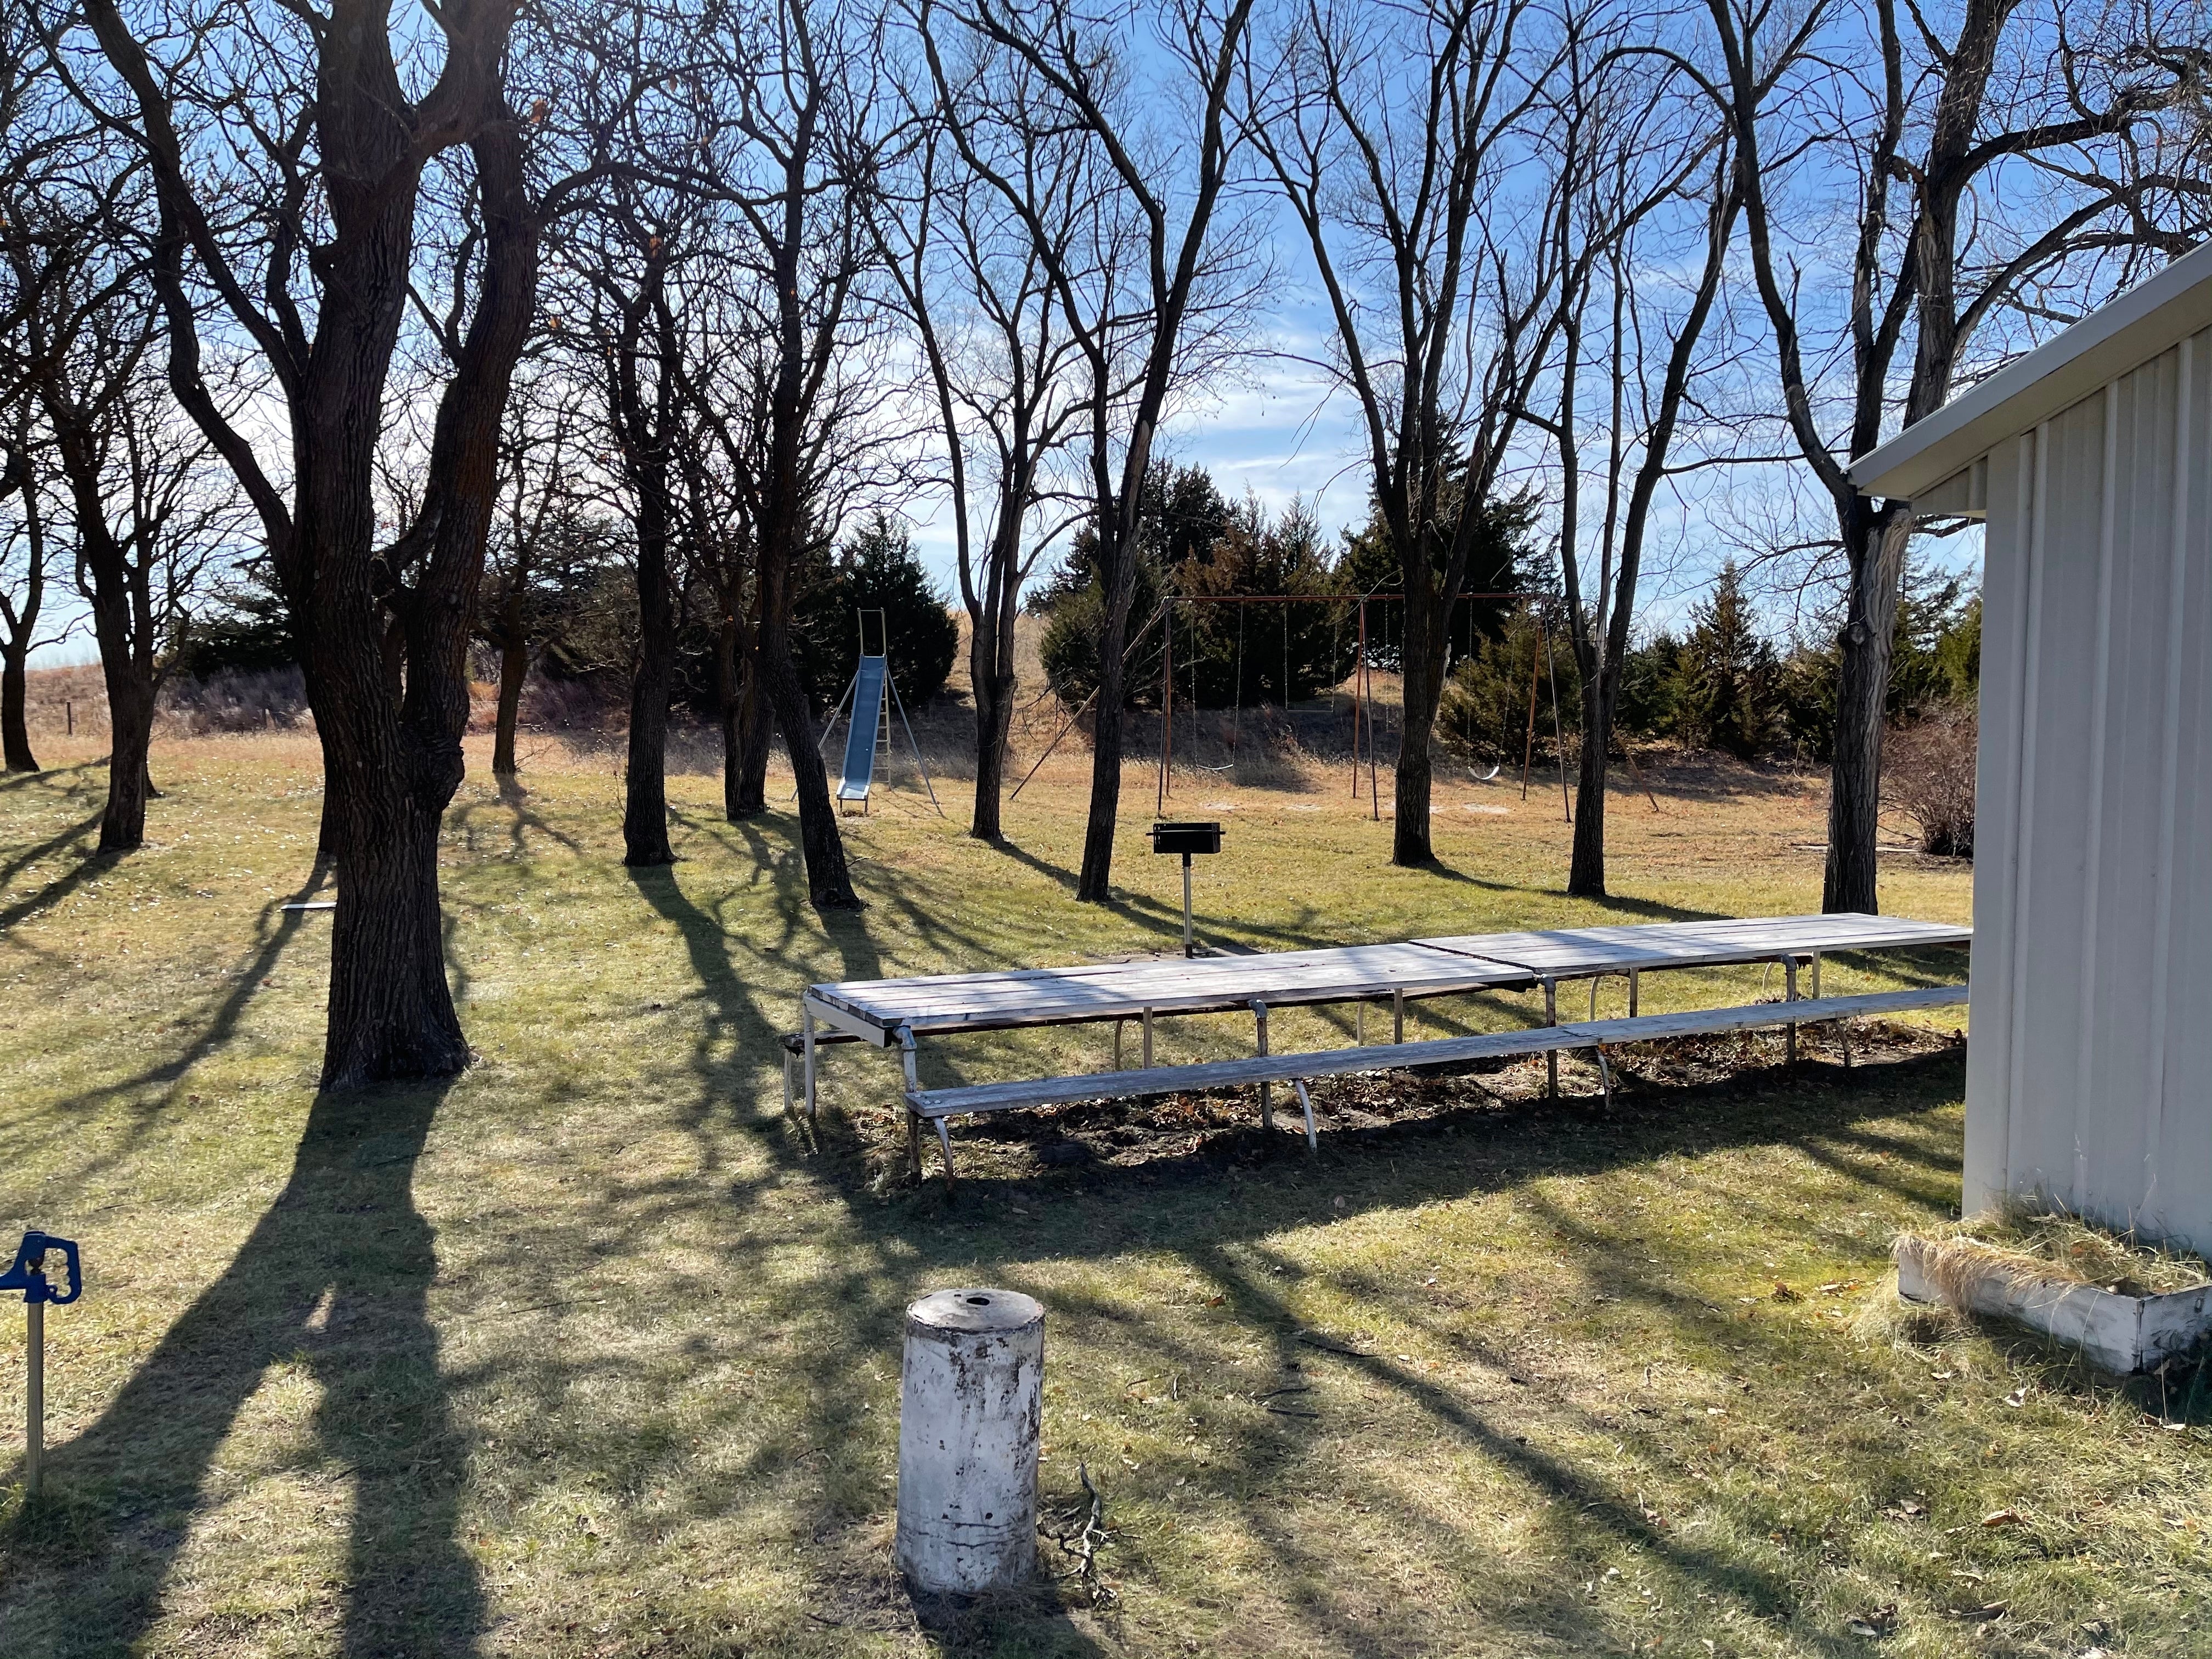 Camper submitted image from Thedford City Park - 3